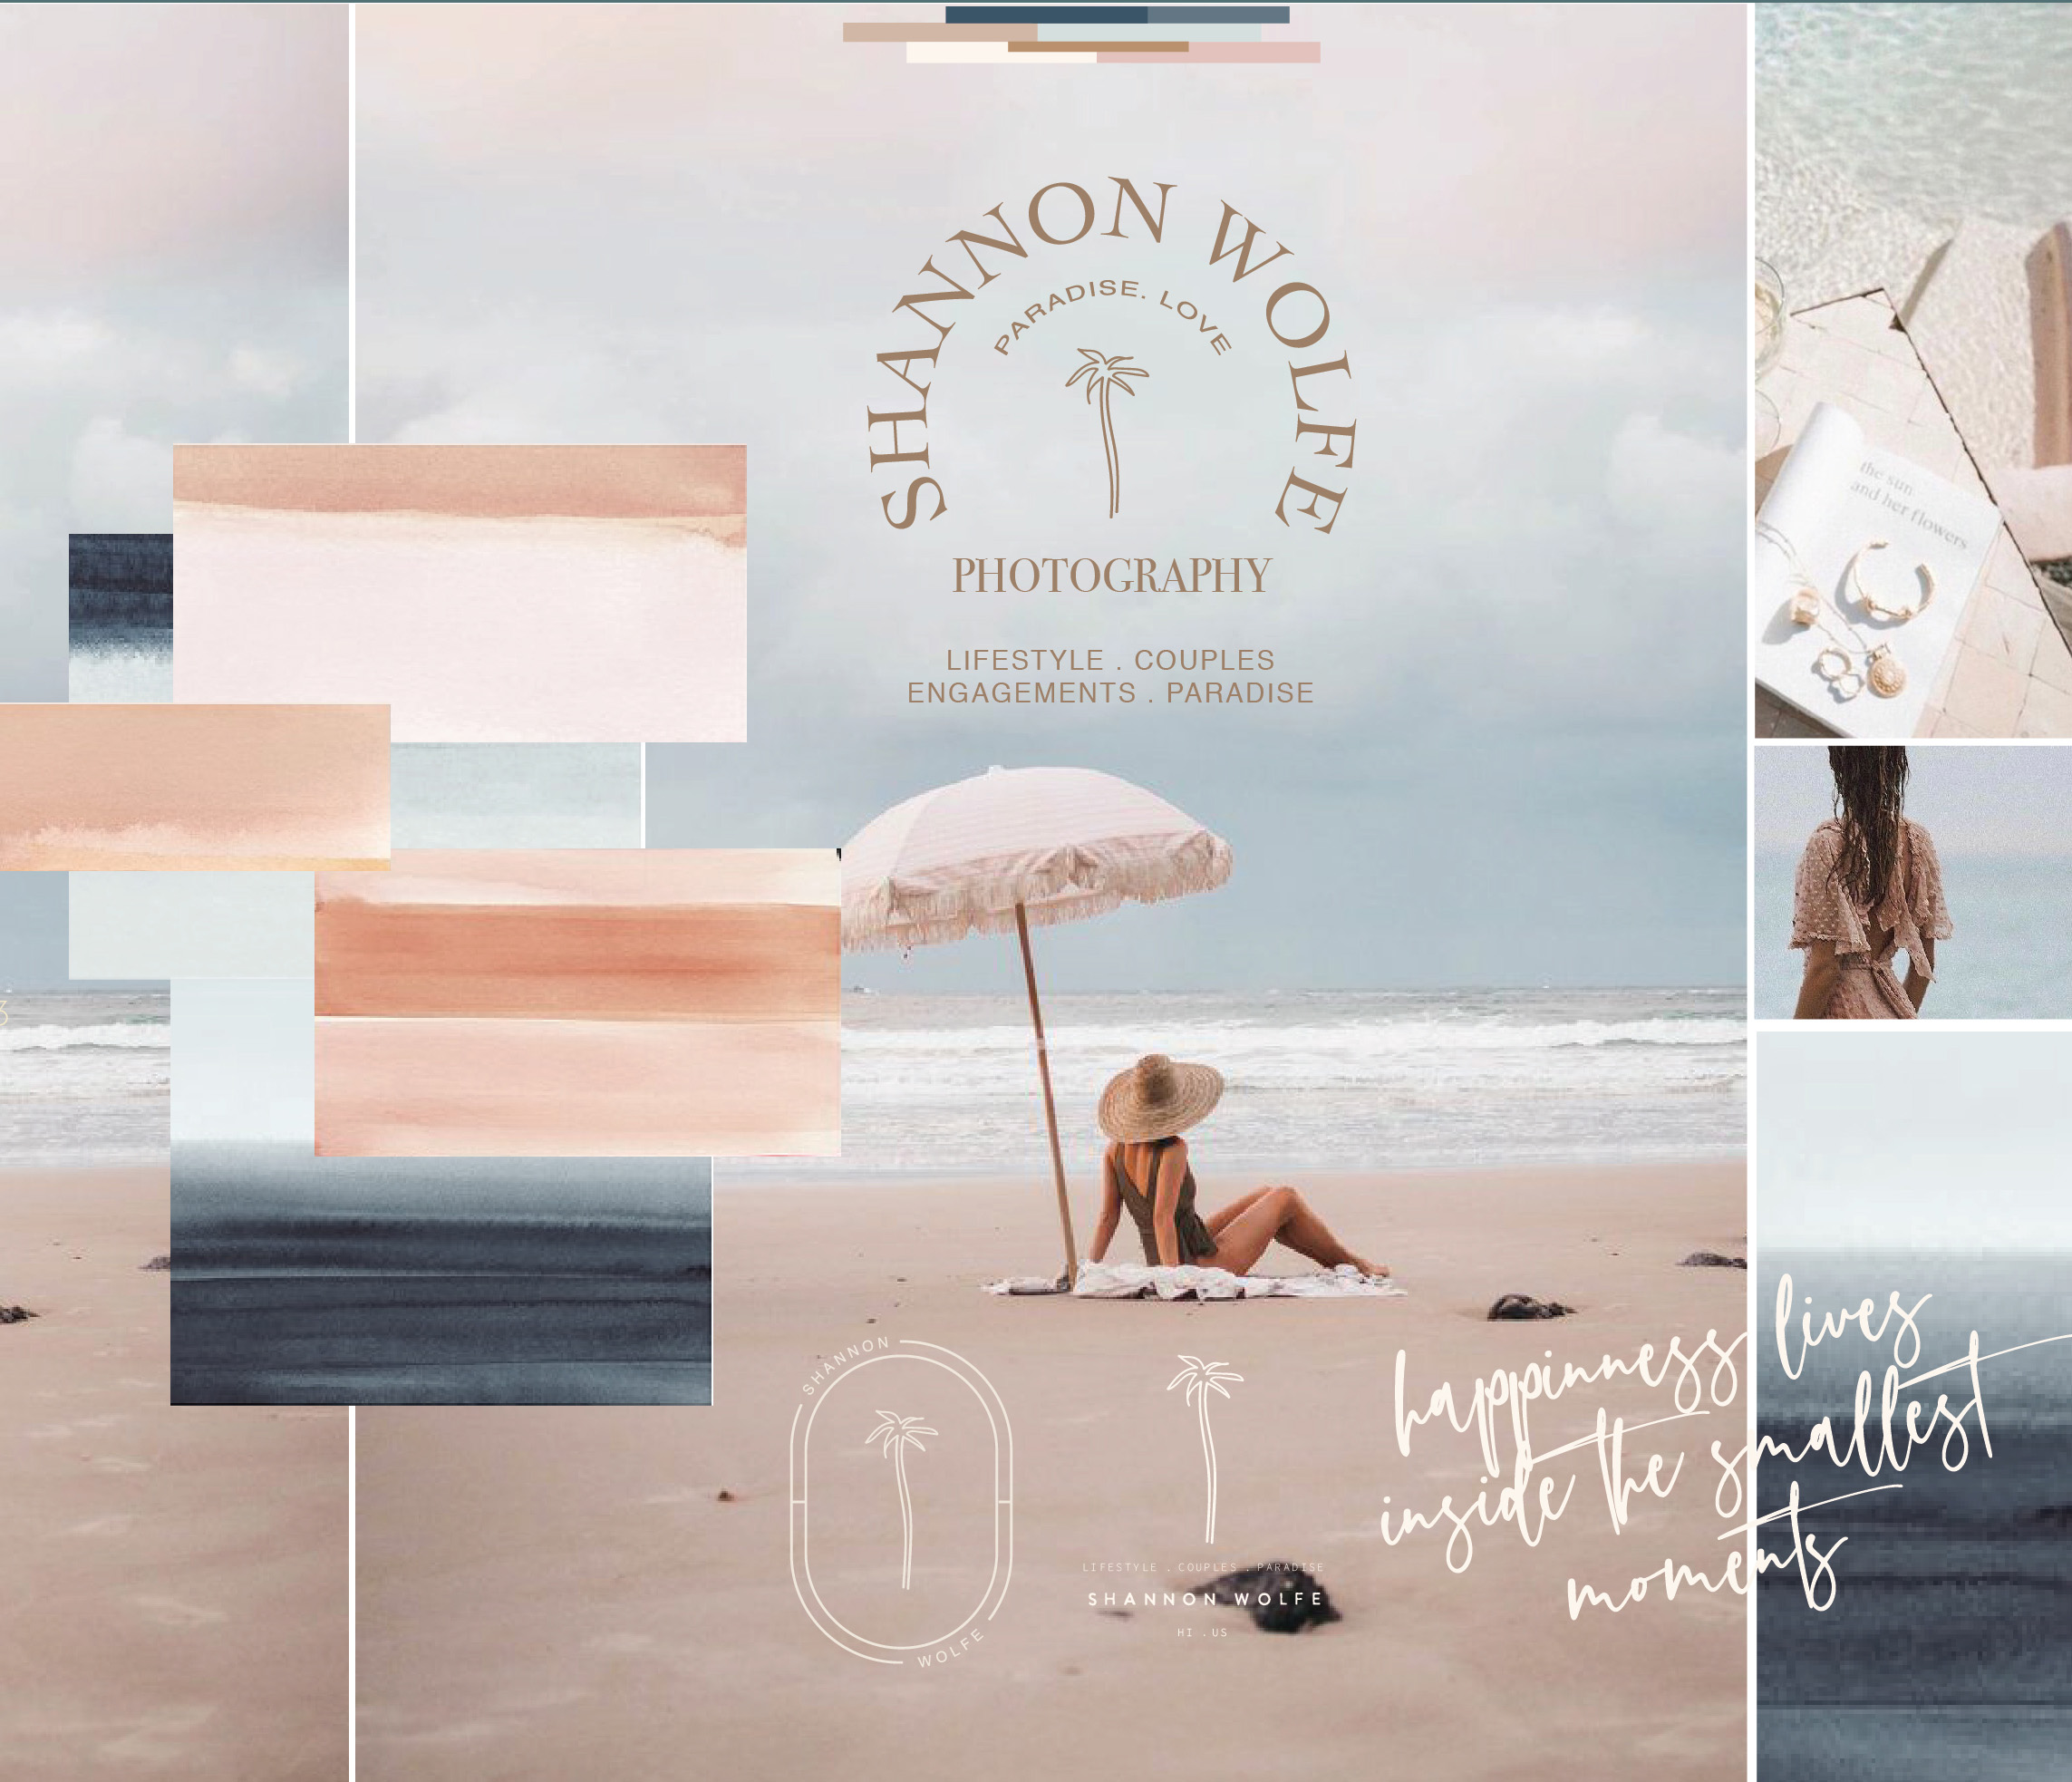 Moodboard design with pink, blue, navy colors and a palm tree logo design with woman sitting under pink beach umbrella